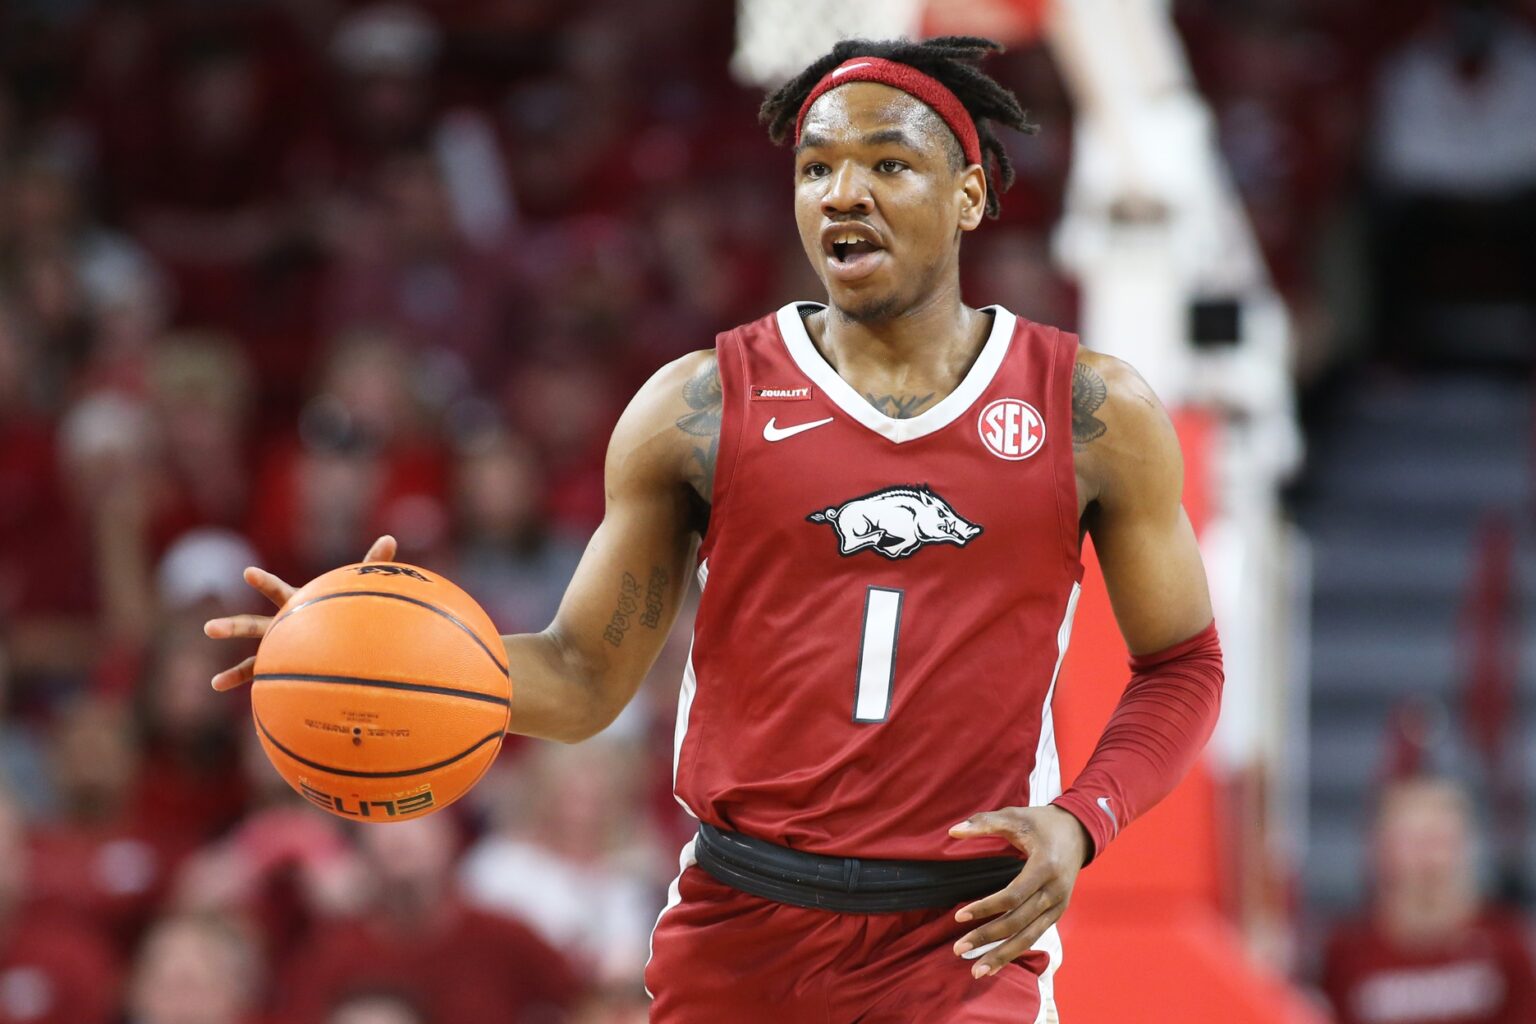 Arkansas vs new mexico state Prediction, Bracketology and Pick for College Basketball NCAA Tournament